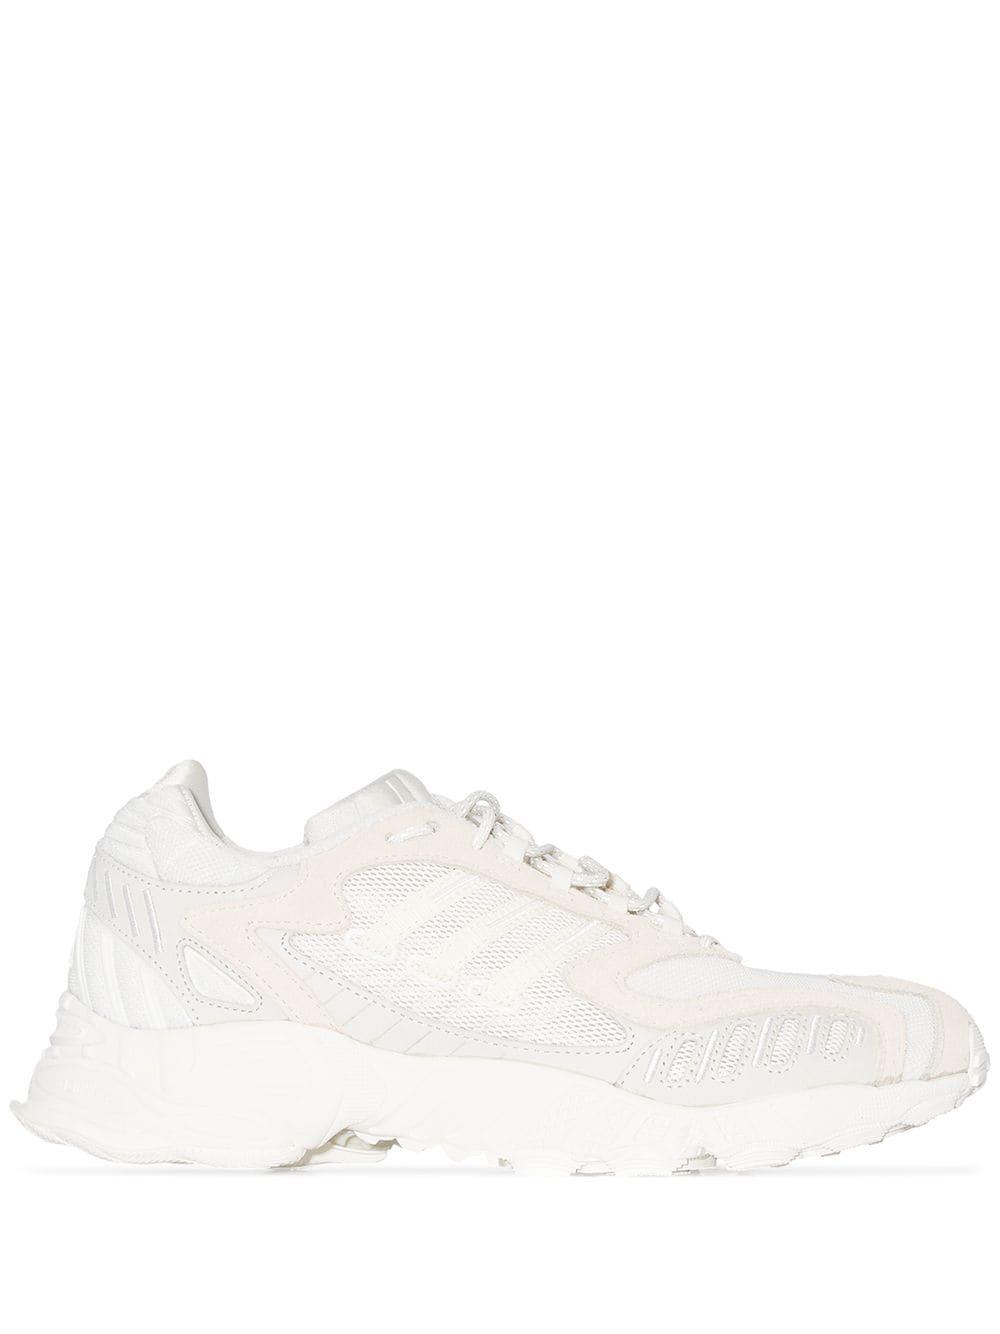 adidas Torsion X Sneakers in White | Lyst